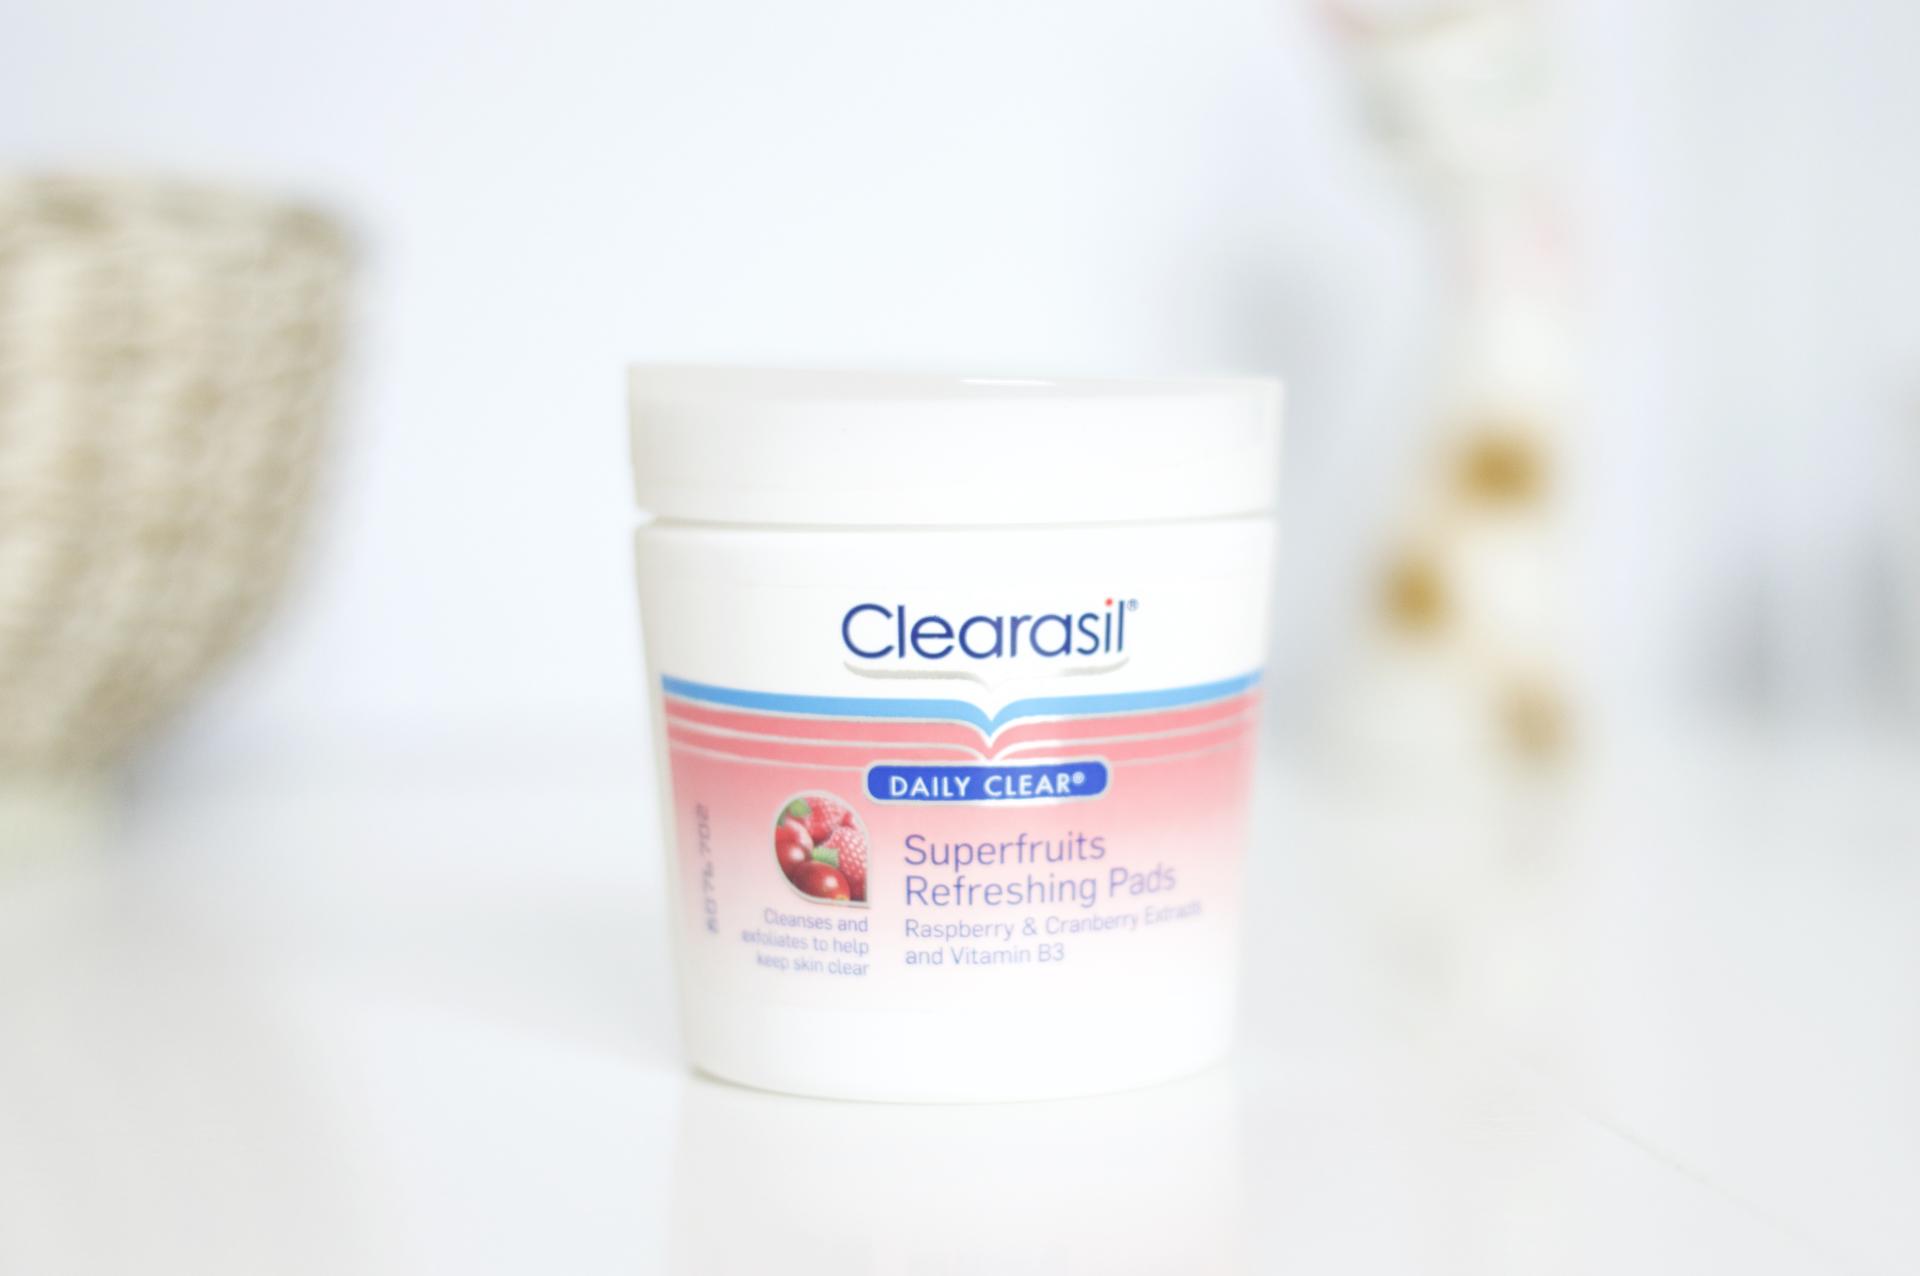 Made From Beauty Clearasil Daily Clear Superfruits Refreshing Pads Review